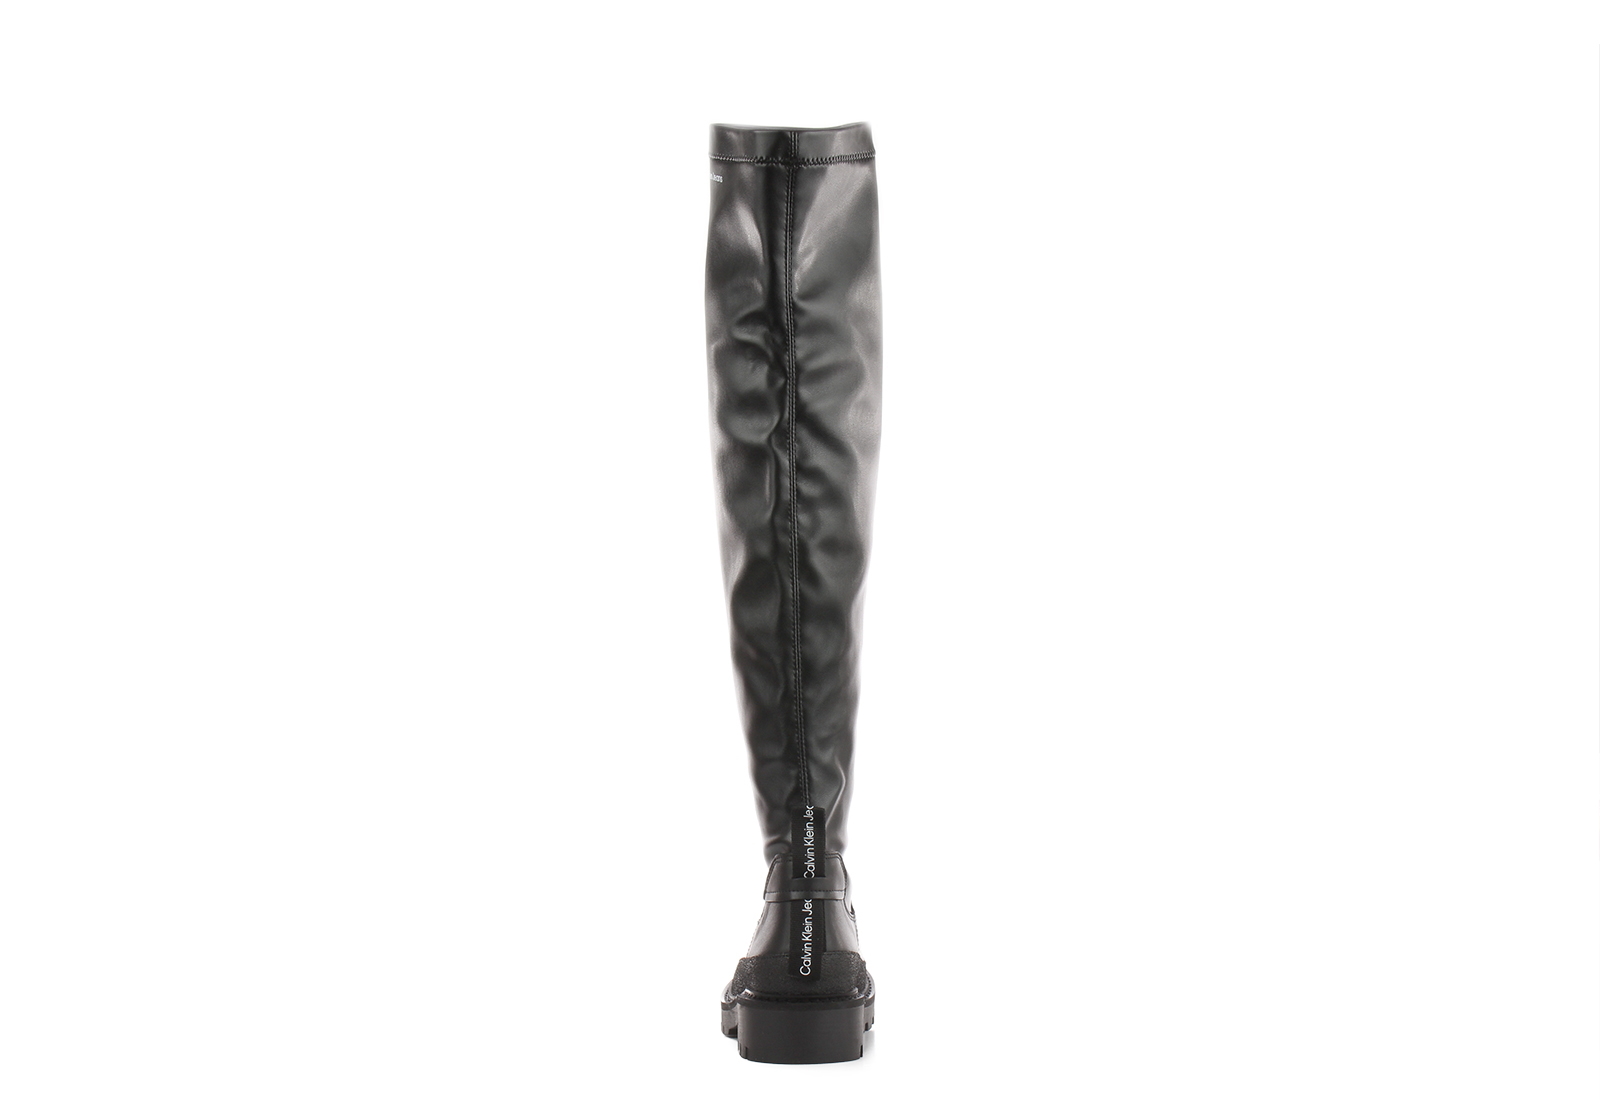 Calvin Klein Jeans Tall boots - Barbara 7c - YW00737-BDS - Online shop for  sneakers, shoes and boots